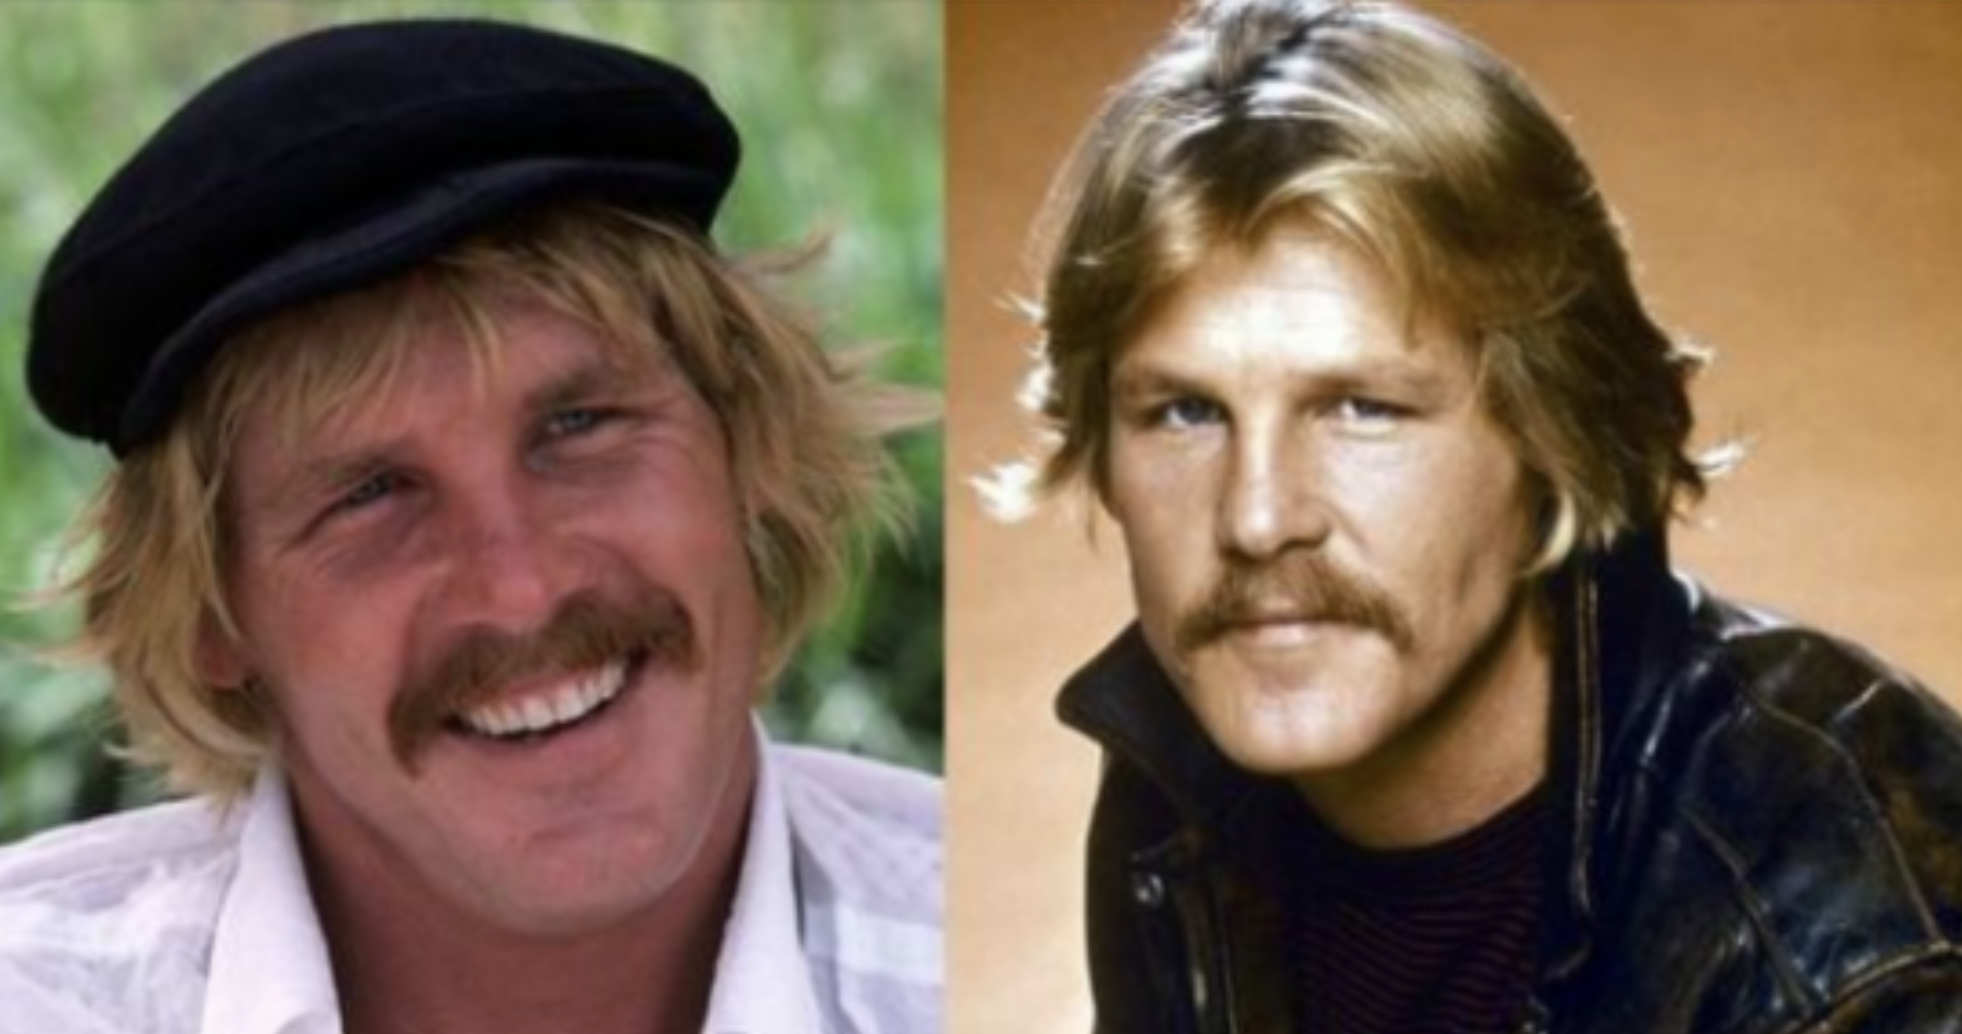 Nick Nolte: A Remarkable Actor Celebrating 82 Years